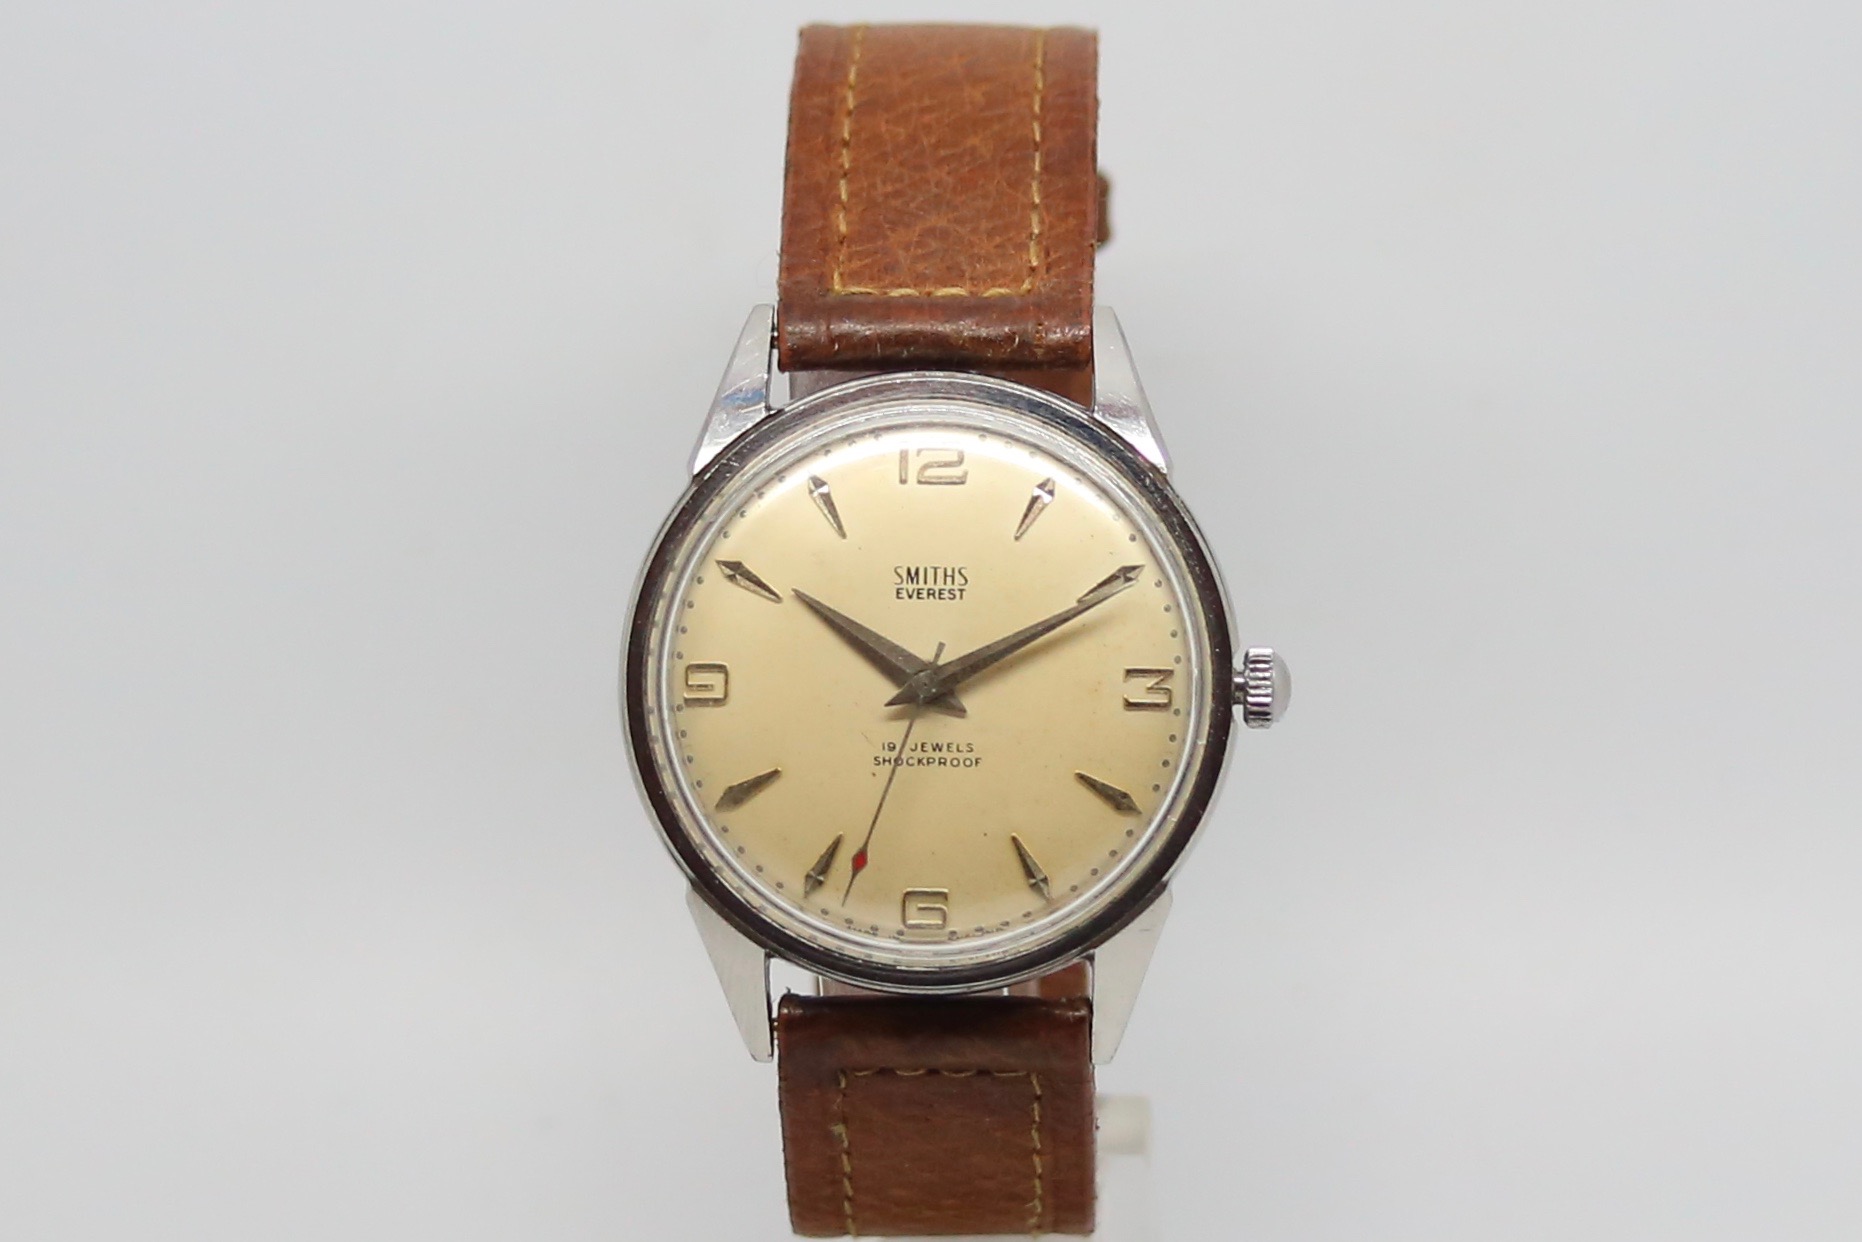 Gentlemen's Smiths Everest Oversize Vintage Wristwatch, circular dial with dagger hour markers, 35mm - Image 2 of 4